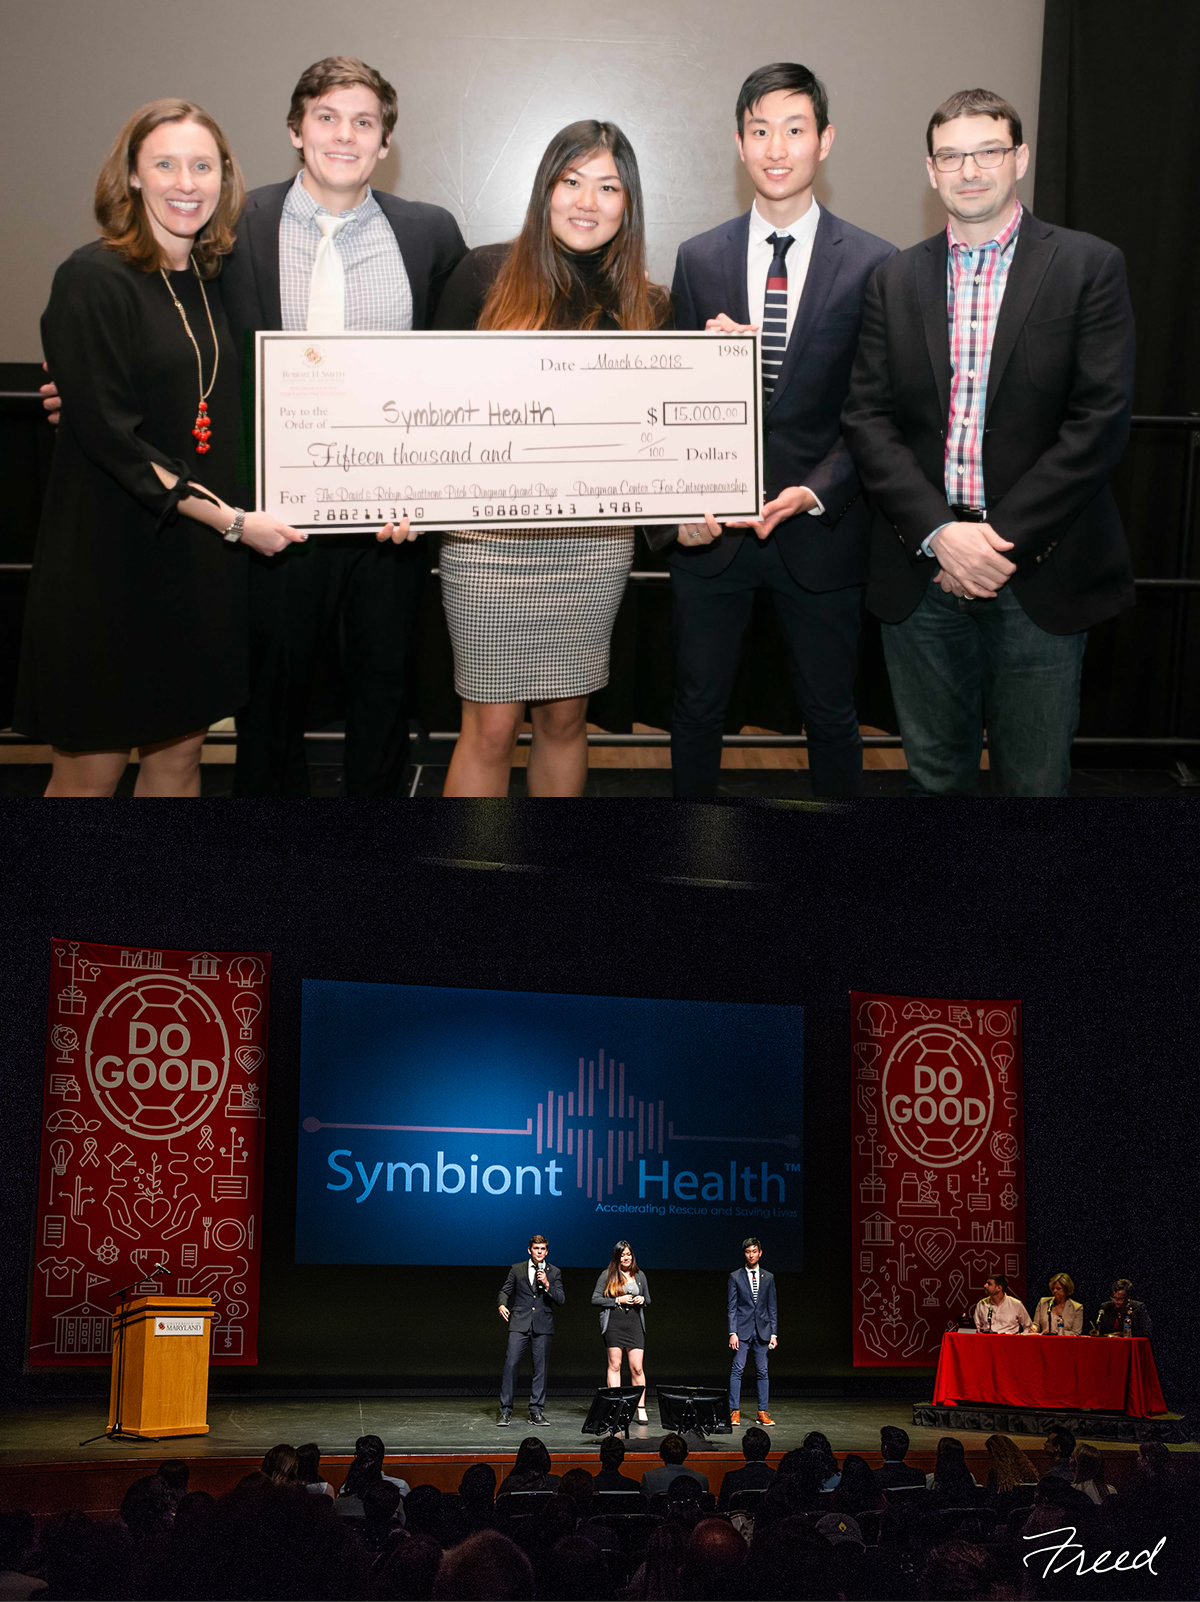 Top photo: Symbiont Health accepts the first prize check for $15,000 at the Pitch Dingman Competition (Photo by Tony Richards). Bottom photo: Symbiont Health at the Do Good Challenge Finals.